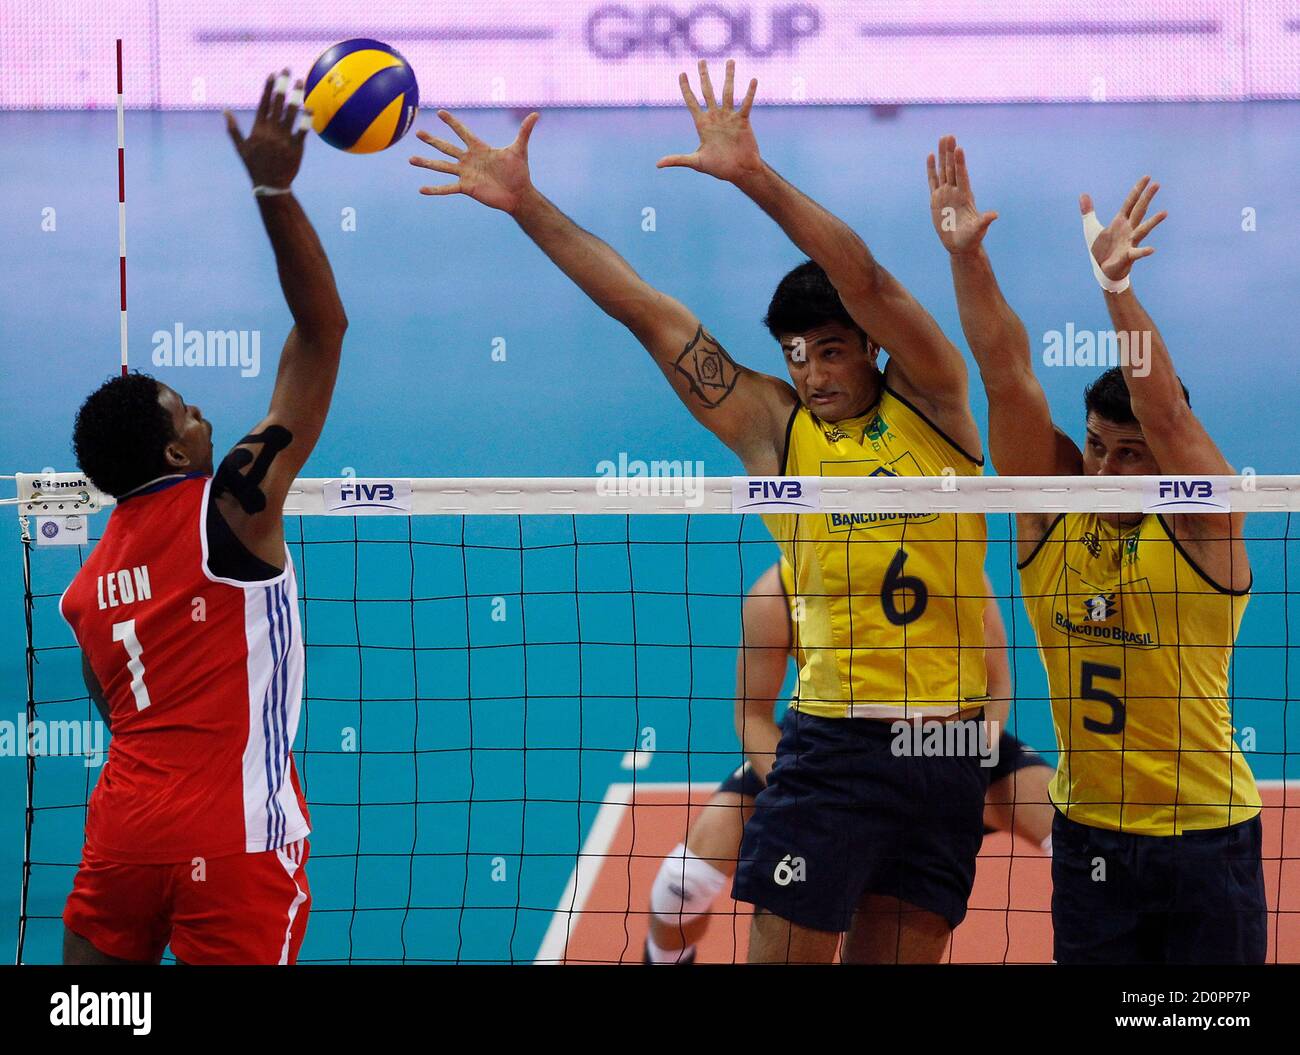 Wilfredo Leon (L) of Cuba spikes the ball against Leandro Vissotto and  Sidnei dos Santos (R) of Brazil during their FIVB World League Pool F men's  volleyball match at Arena Armeec hall